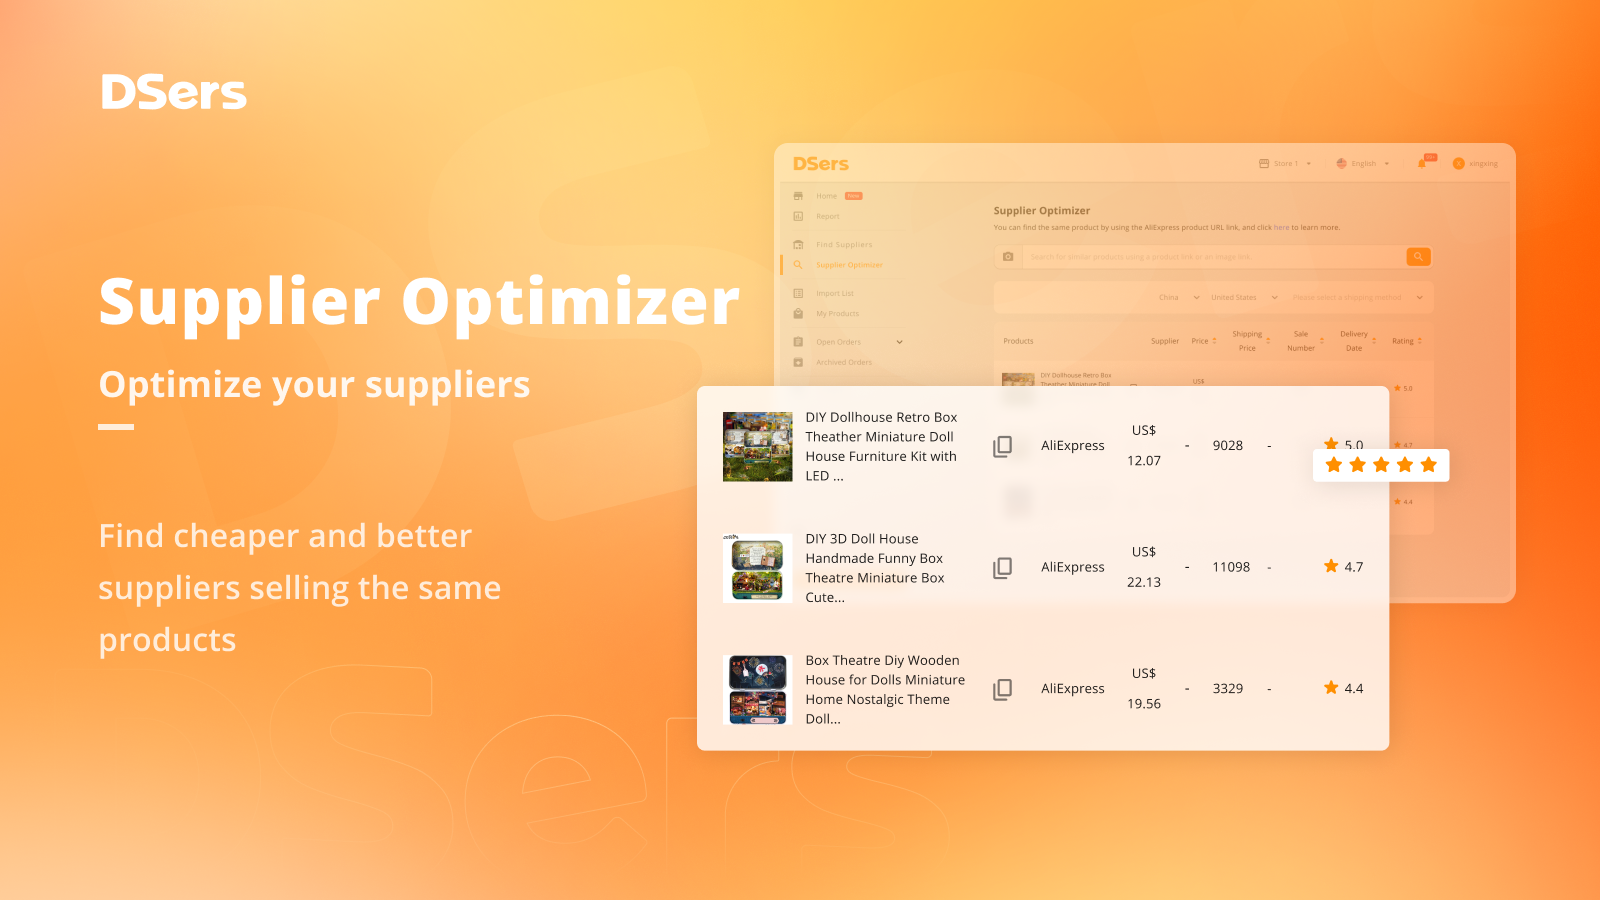 Use the Supplier Optimizer to find better suppliers